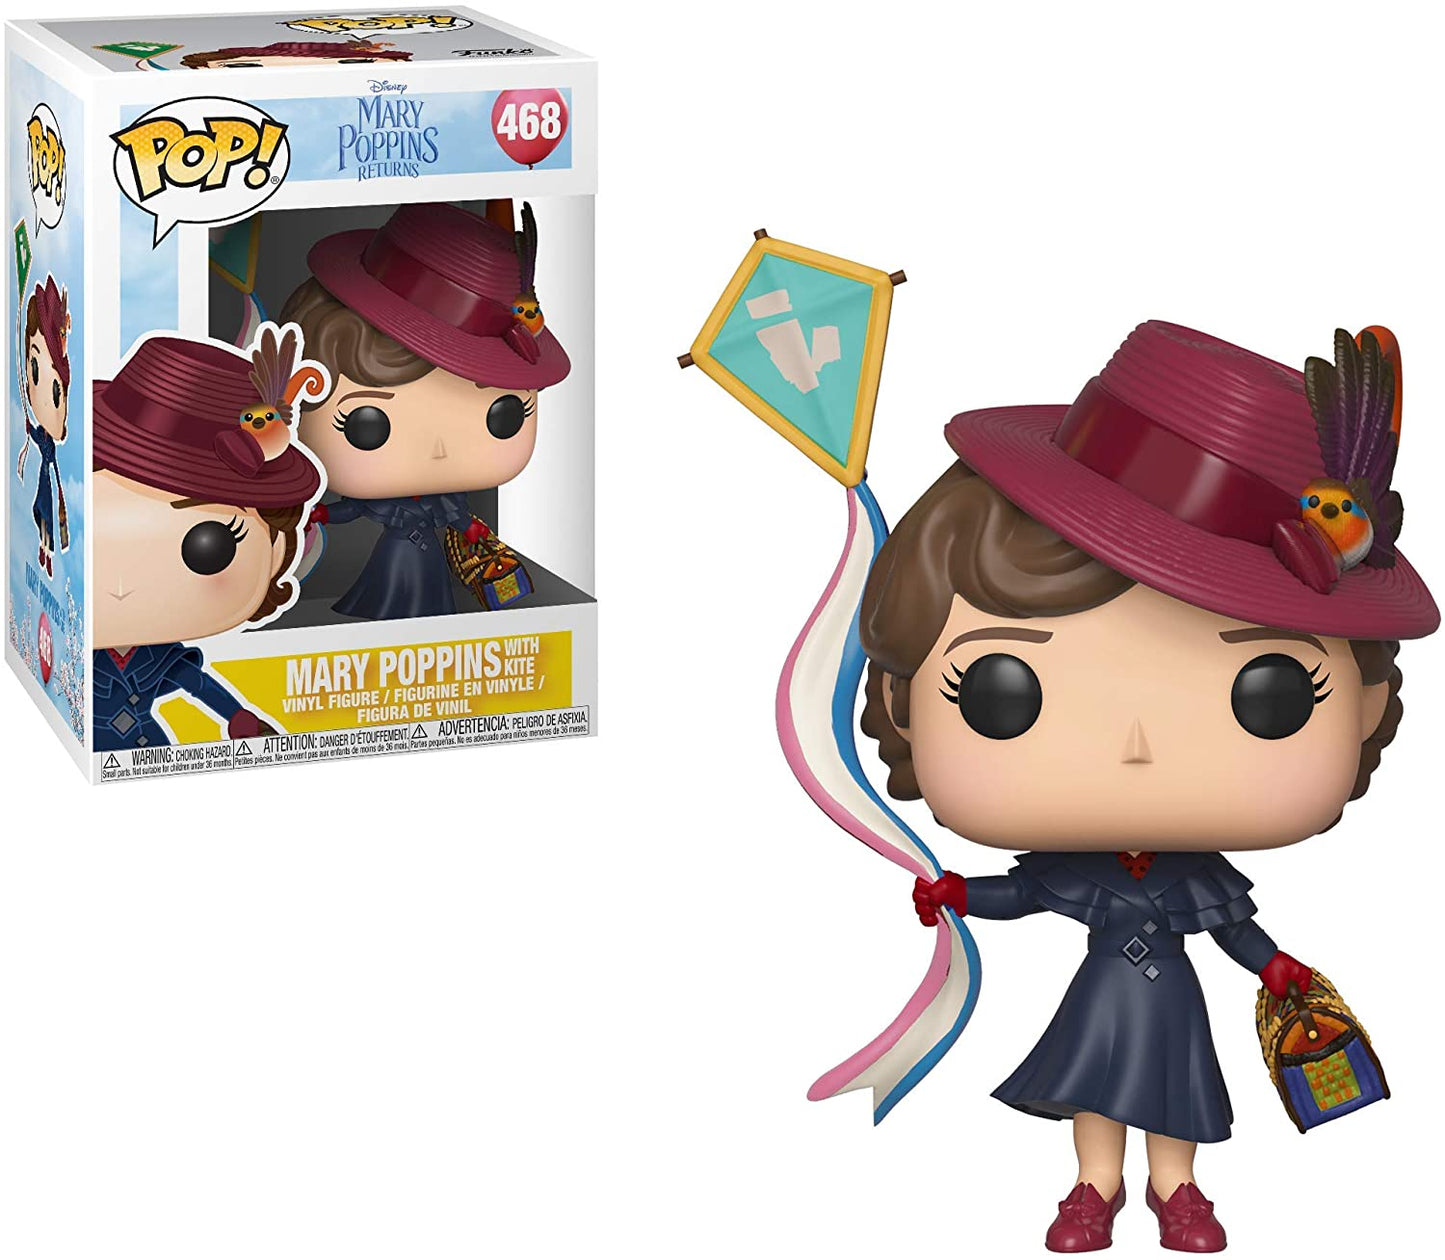 MARY POPPINS WITH KITE #468 POP